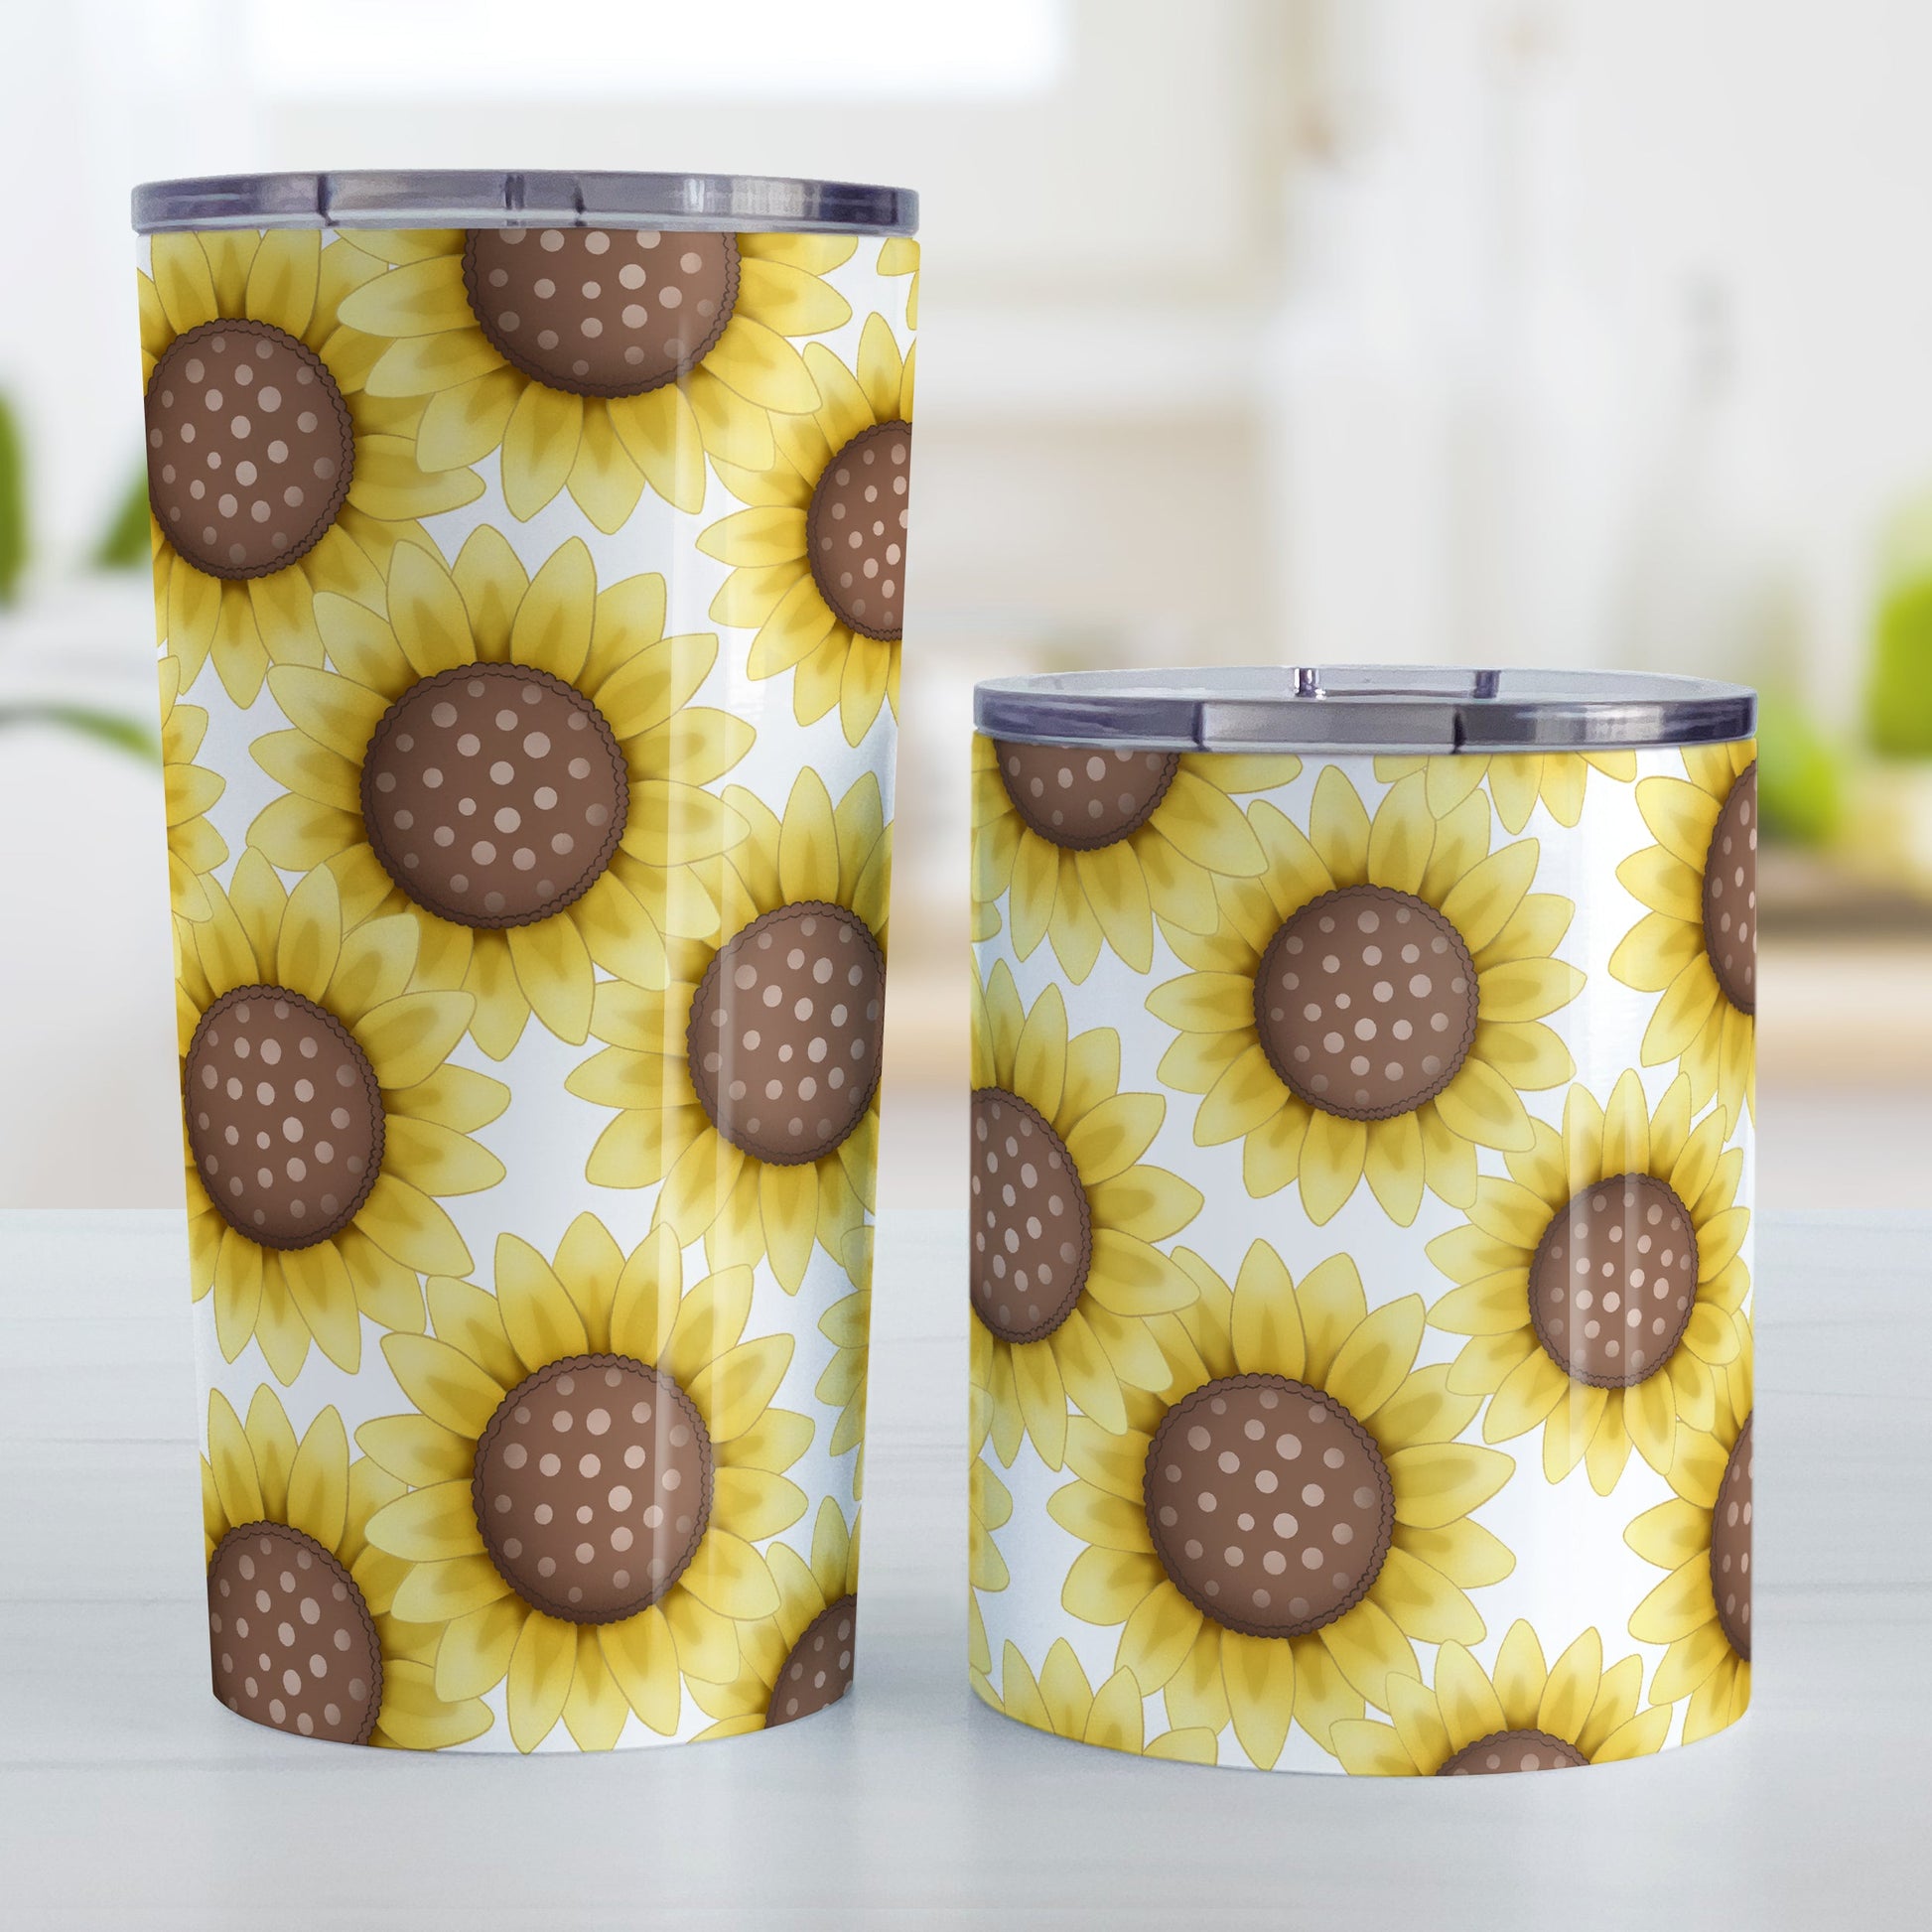 Sunflower Pattern Tumbler Cup (20oz and 10oz) at Amy's Coffee Mugs. Stainless steel insulated tumbler cups designed with cute yellow sunflowers with dotted brown centers in a pattern that wraps around the cups. Photo shows both sized cups next to each other.